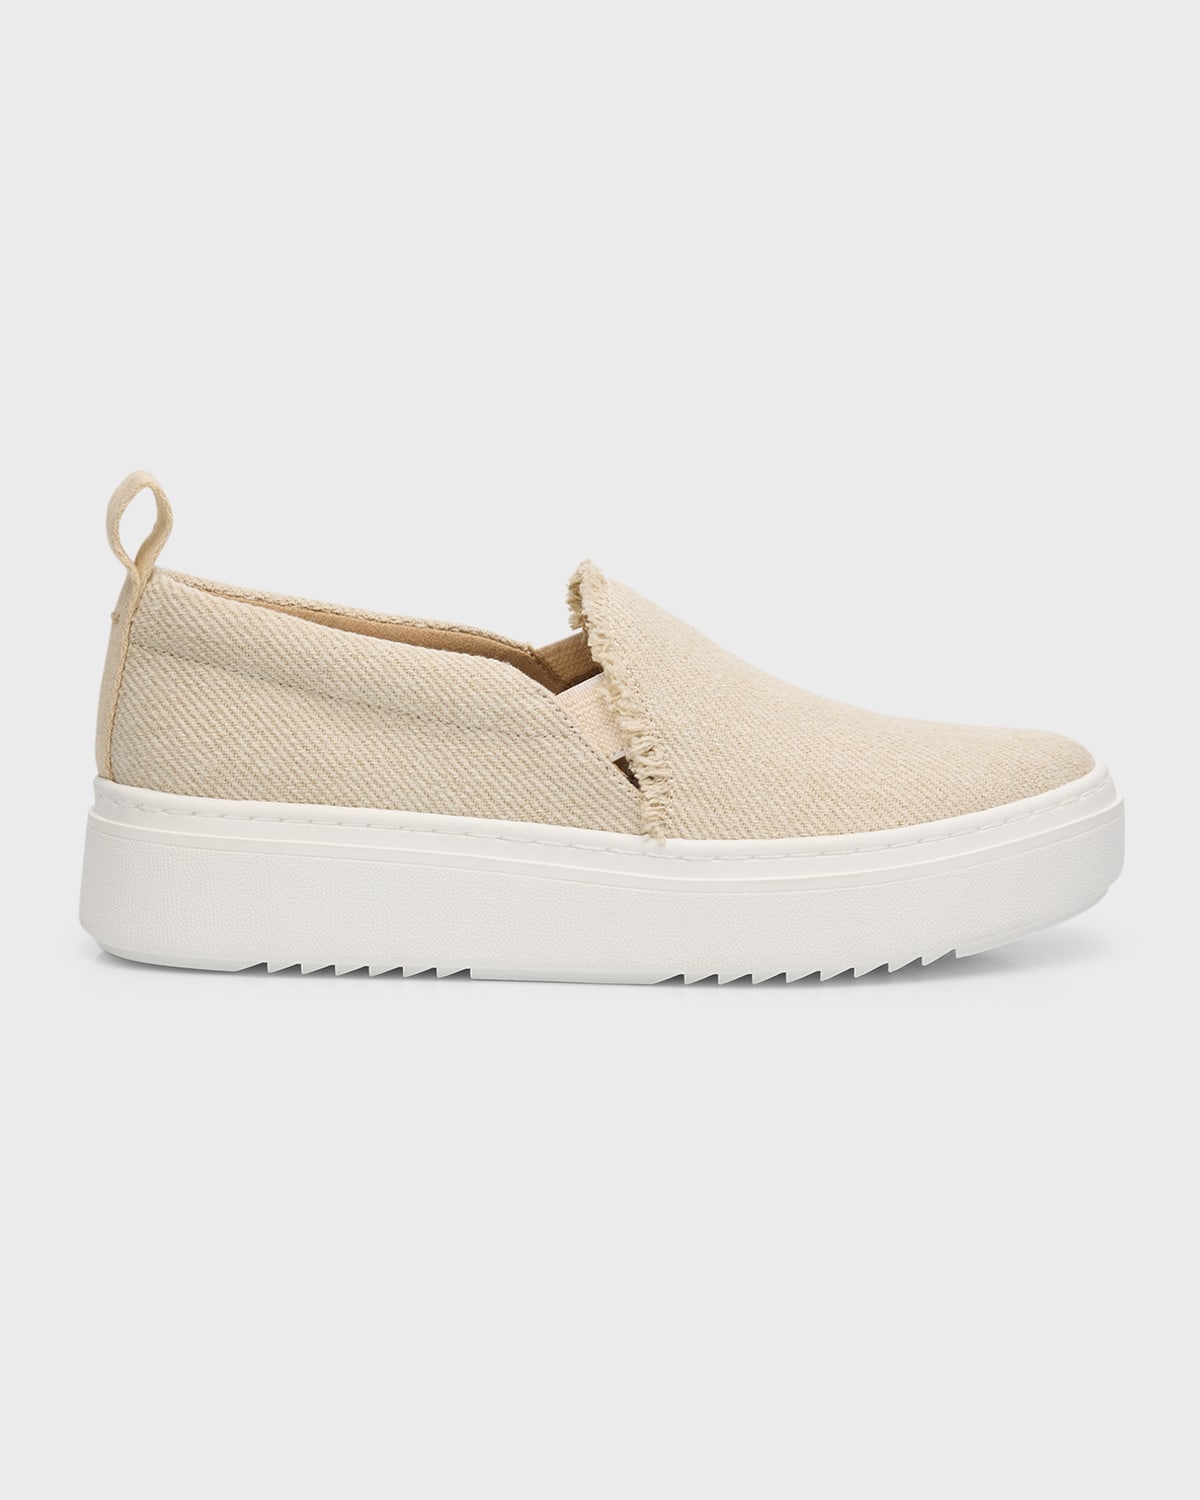 Pall Canvas Slip-On Sneakers